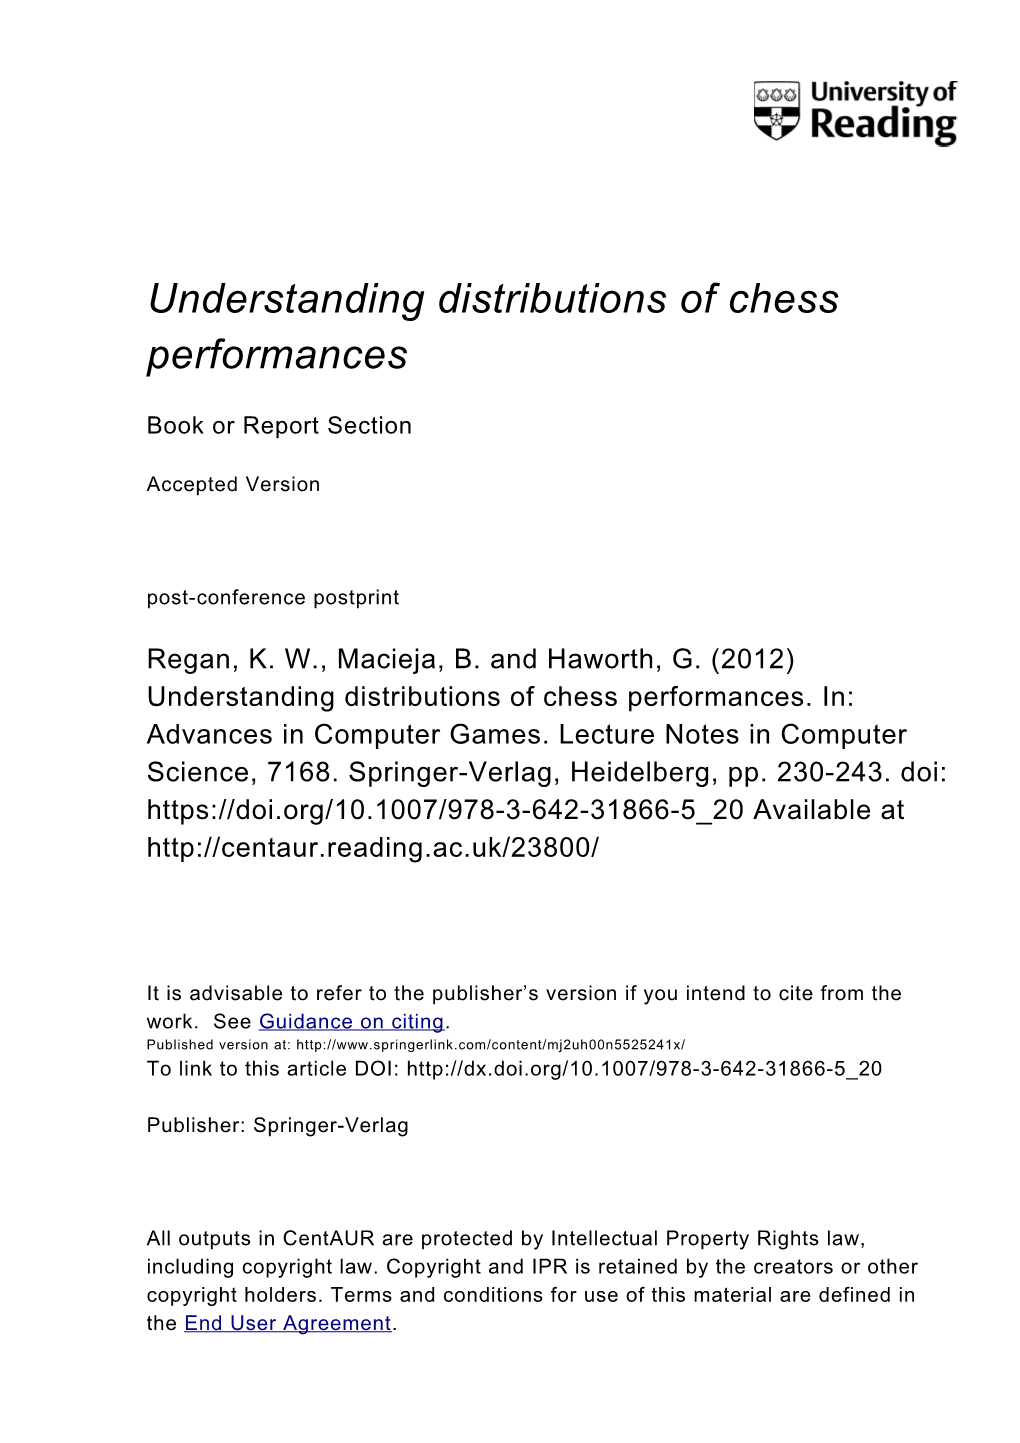 Understanding Distributions of Chess Performances